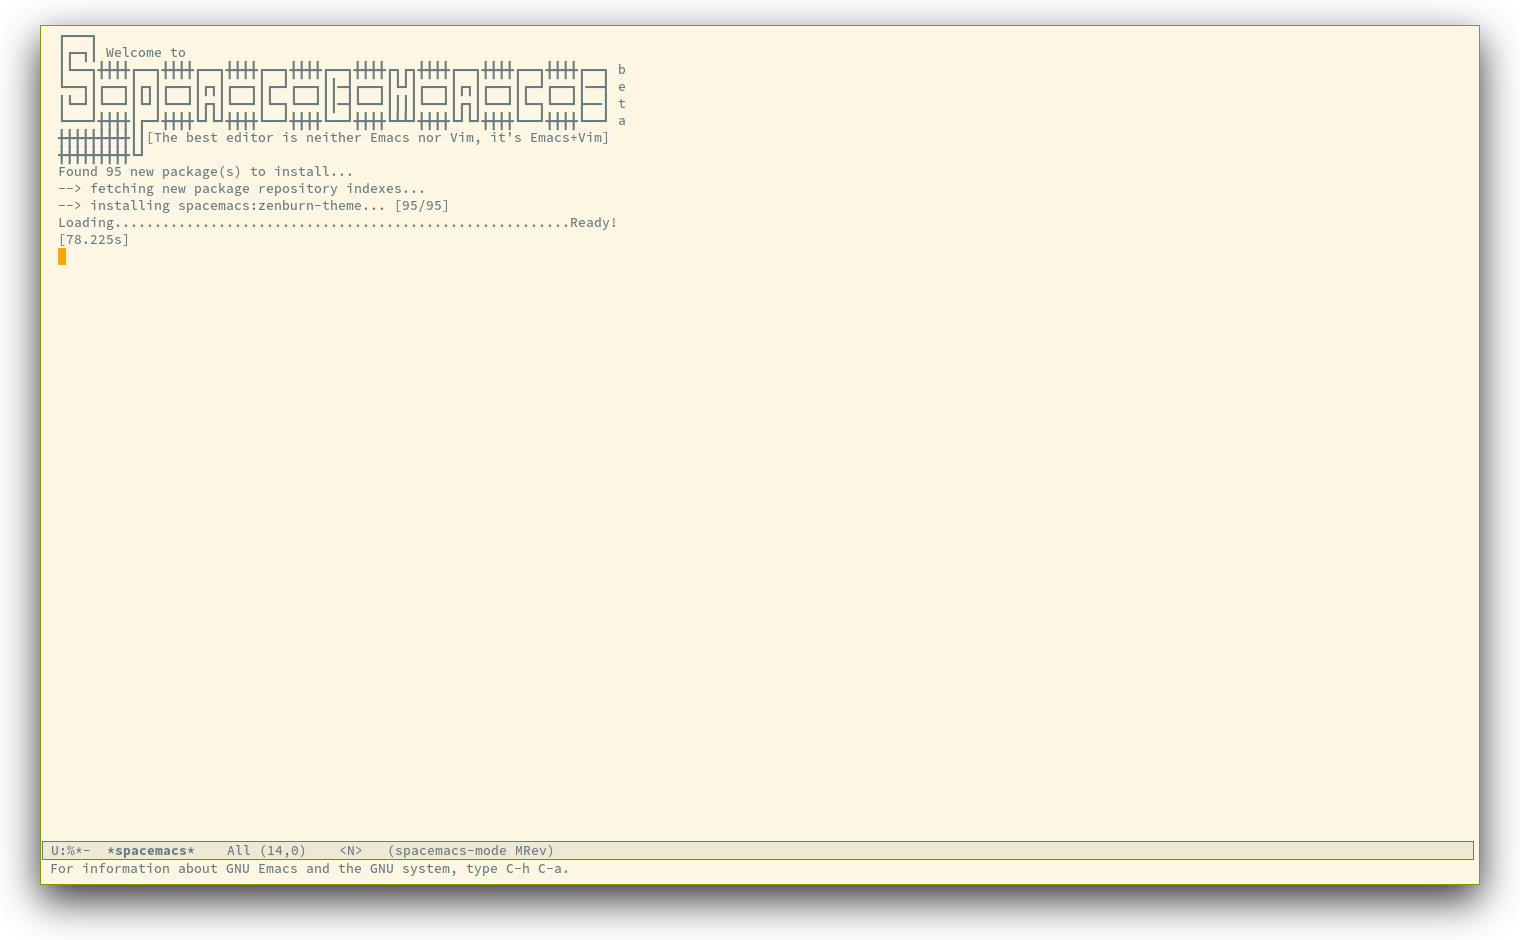 /TakeV/spacemacs/media/commit/ad7d310883fafbbf8e25054d5d8277d282874981/doc/img/spacemacs-startup.png